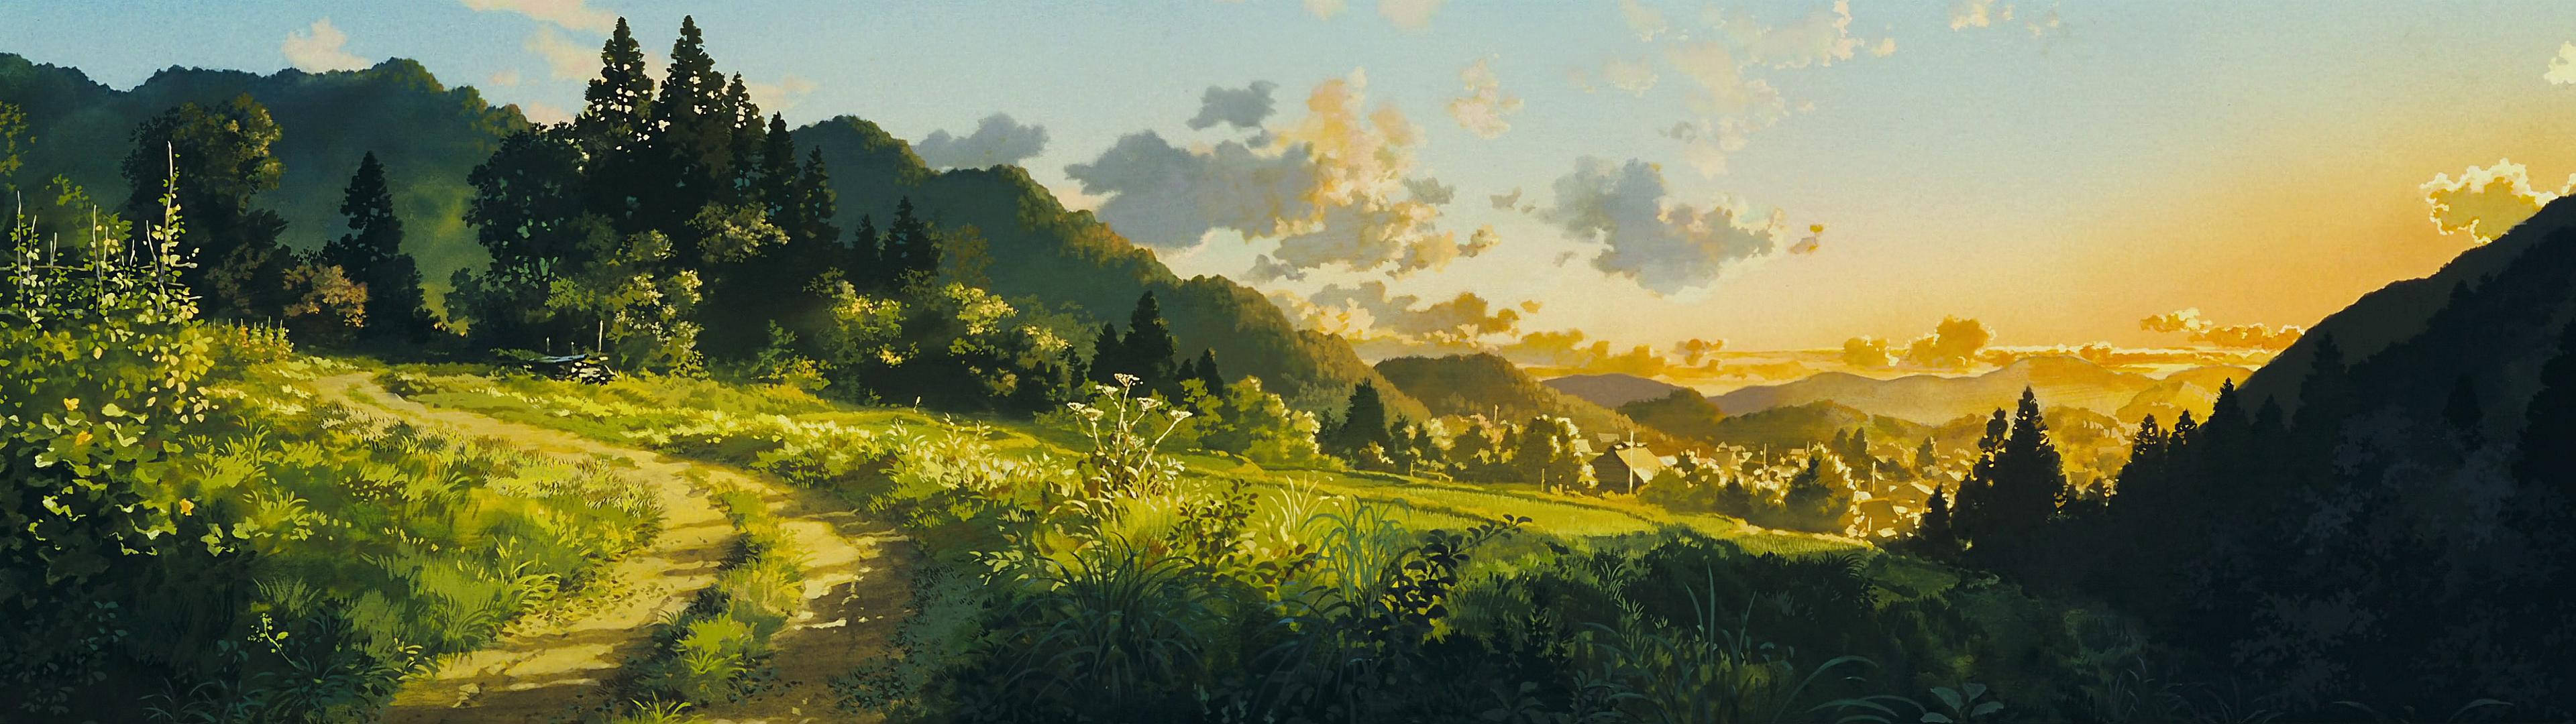 Anime Inspired Green Landscape, Perfect For Dual Monitor Wallpaper Background